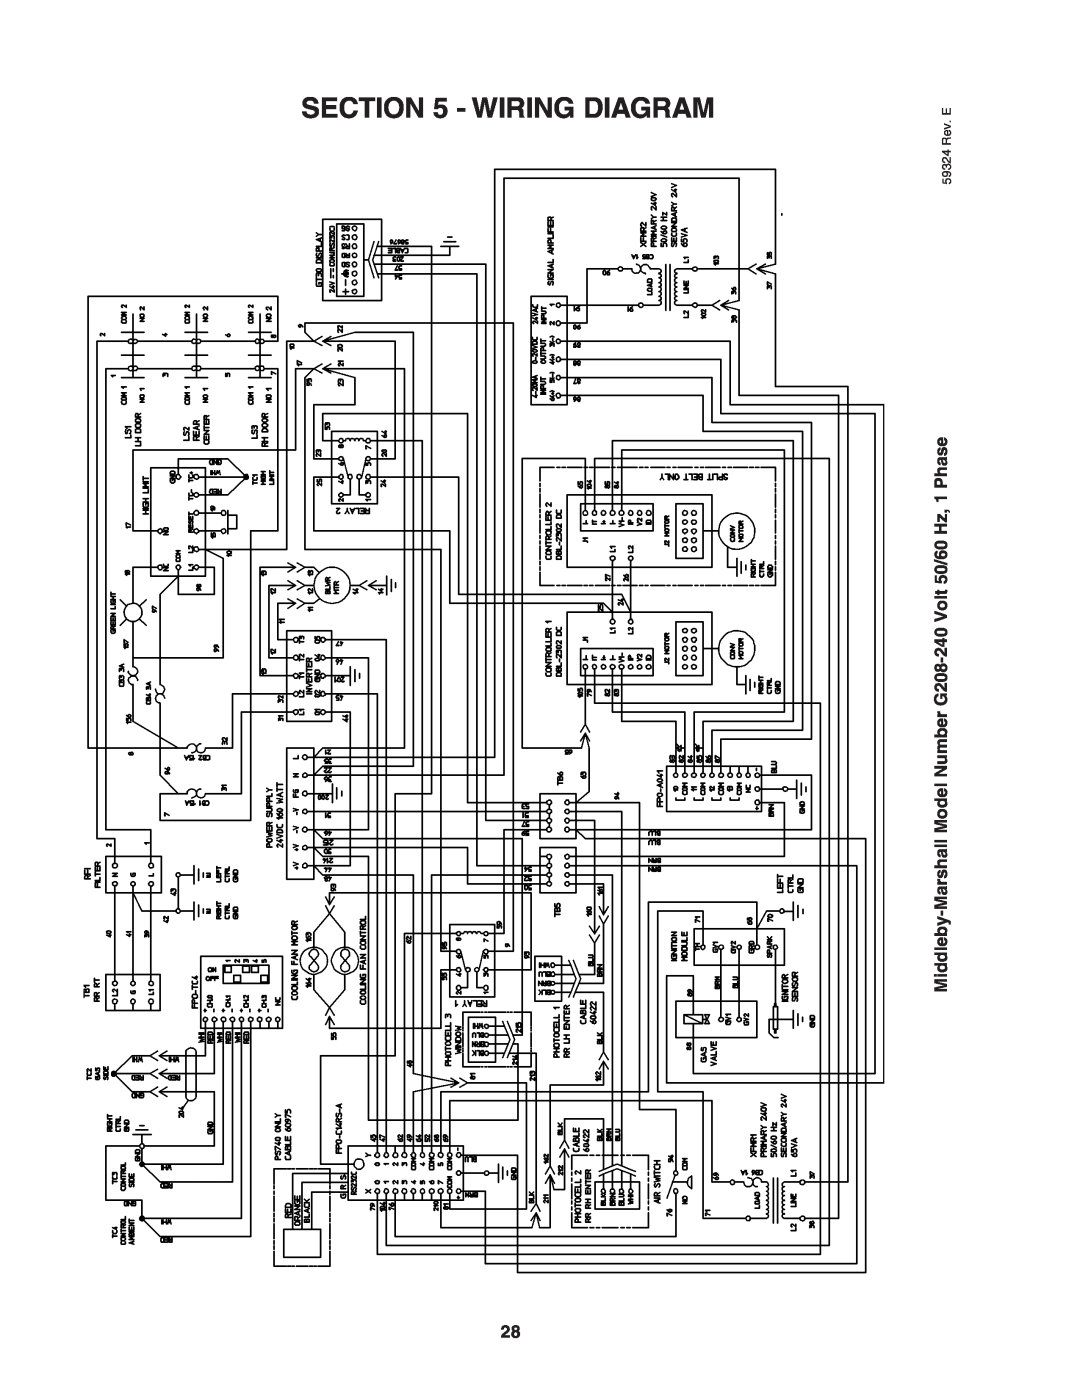 Middleby Marshall PS640 installation manual Wiring Diagram, Middleby-Marshall Model Number G208-240 Volt 50/60 Hz, 1 Phase 